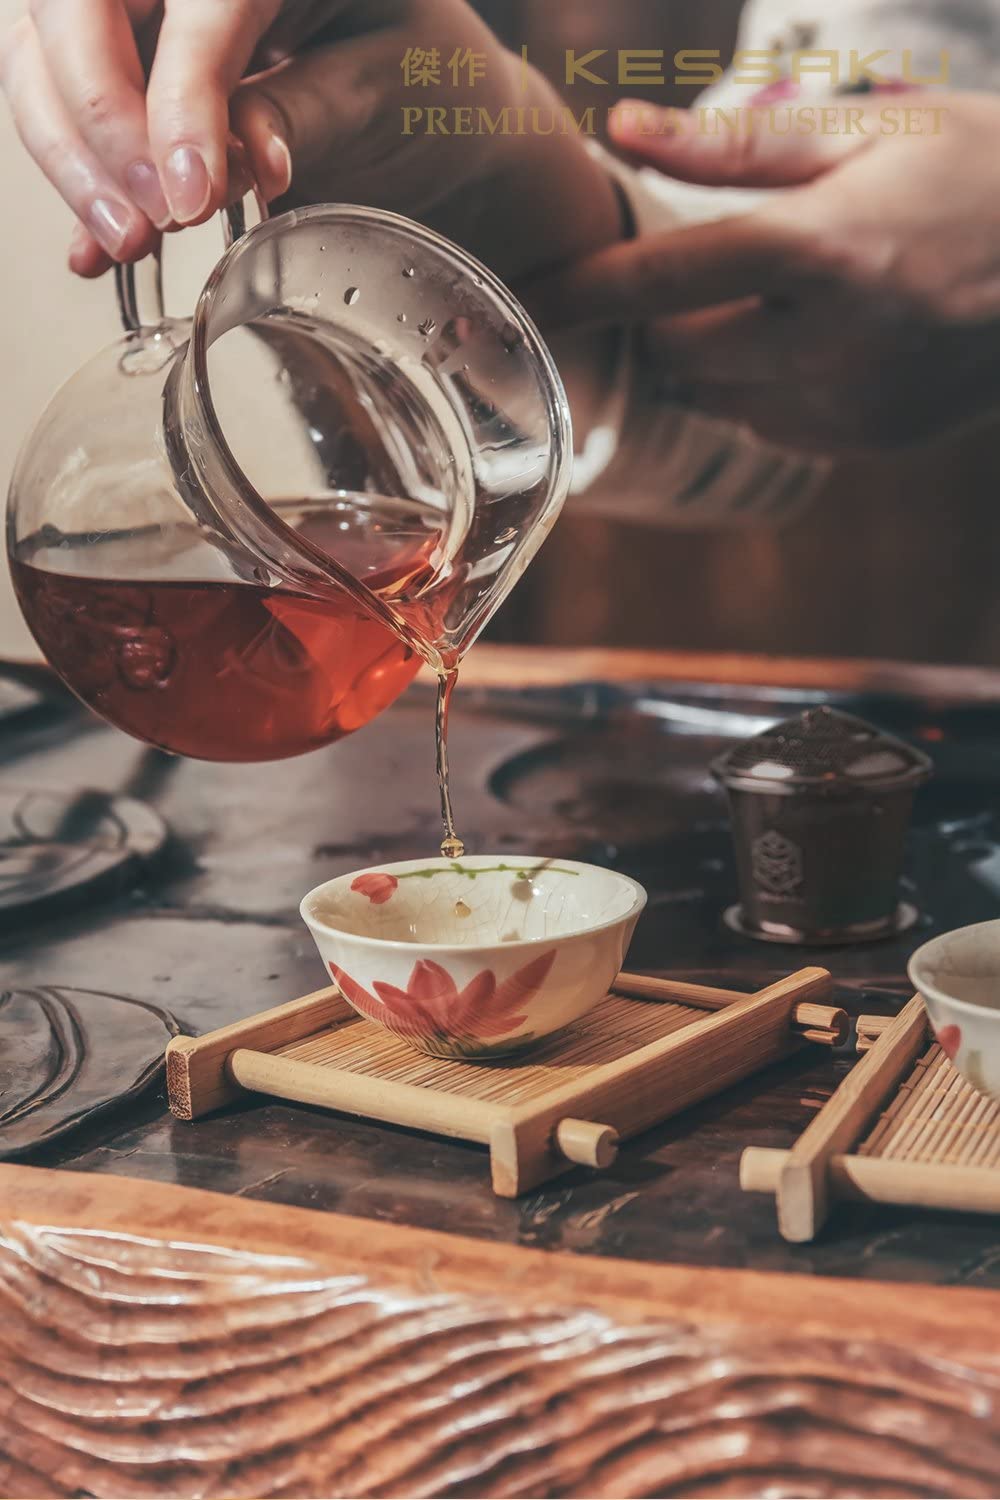 A woman pours freshly steeped tea into a small cup